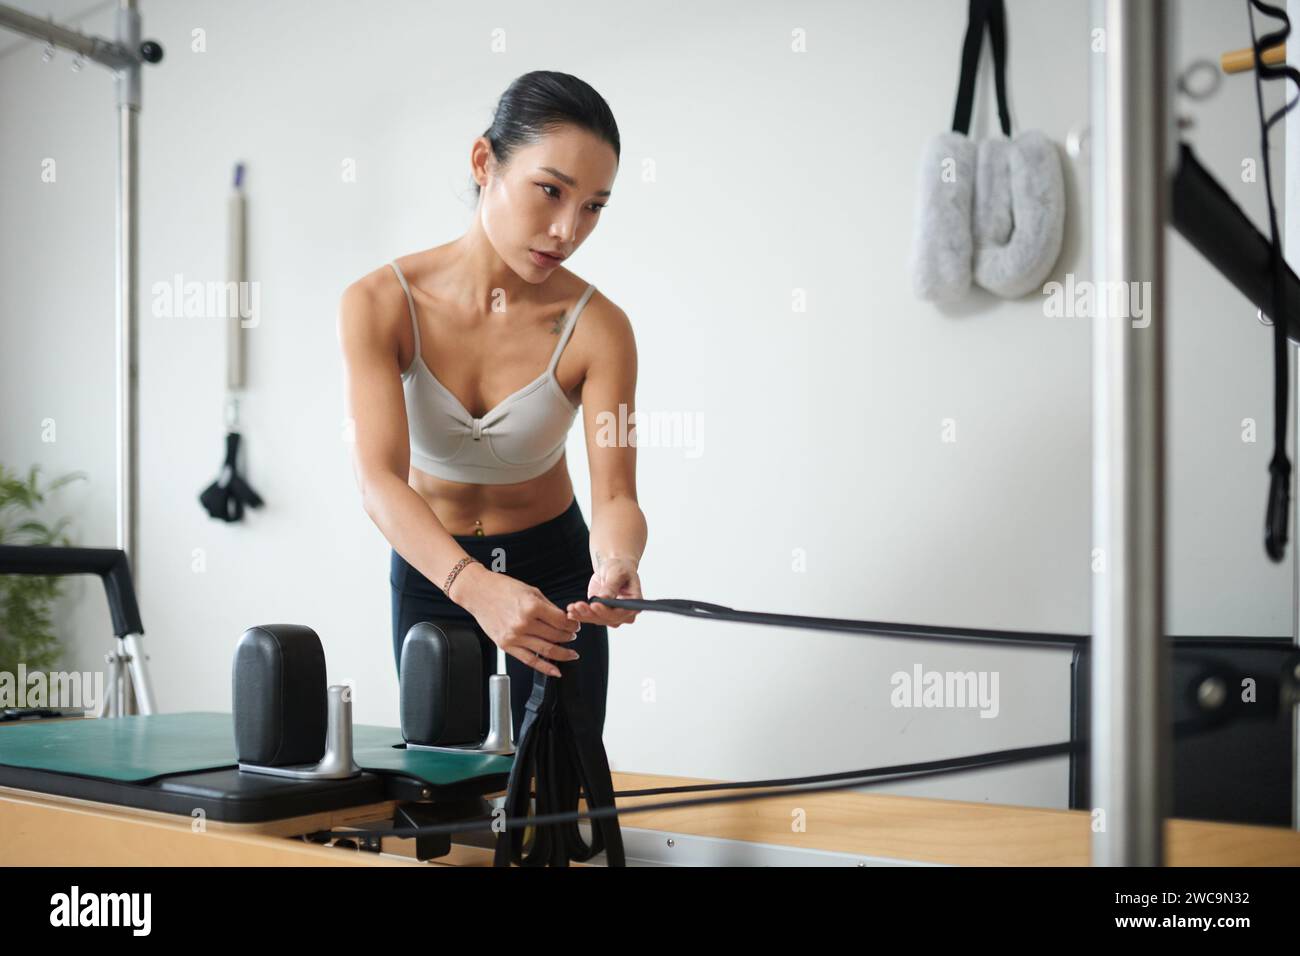 Fit young woman adjusting straps in exercise machine Stock Photo